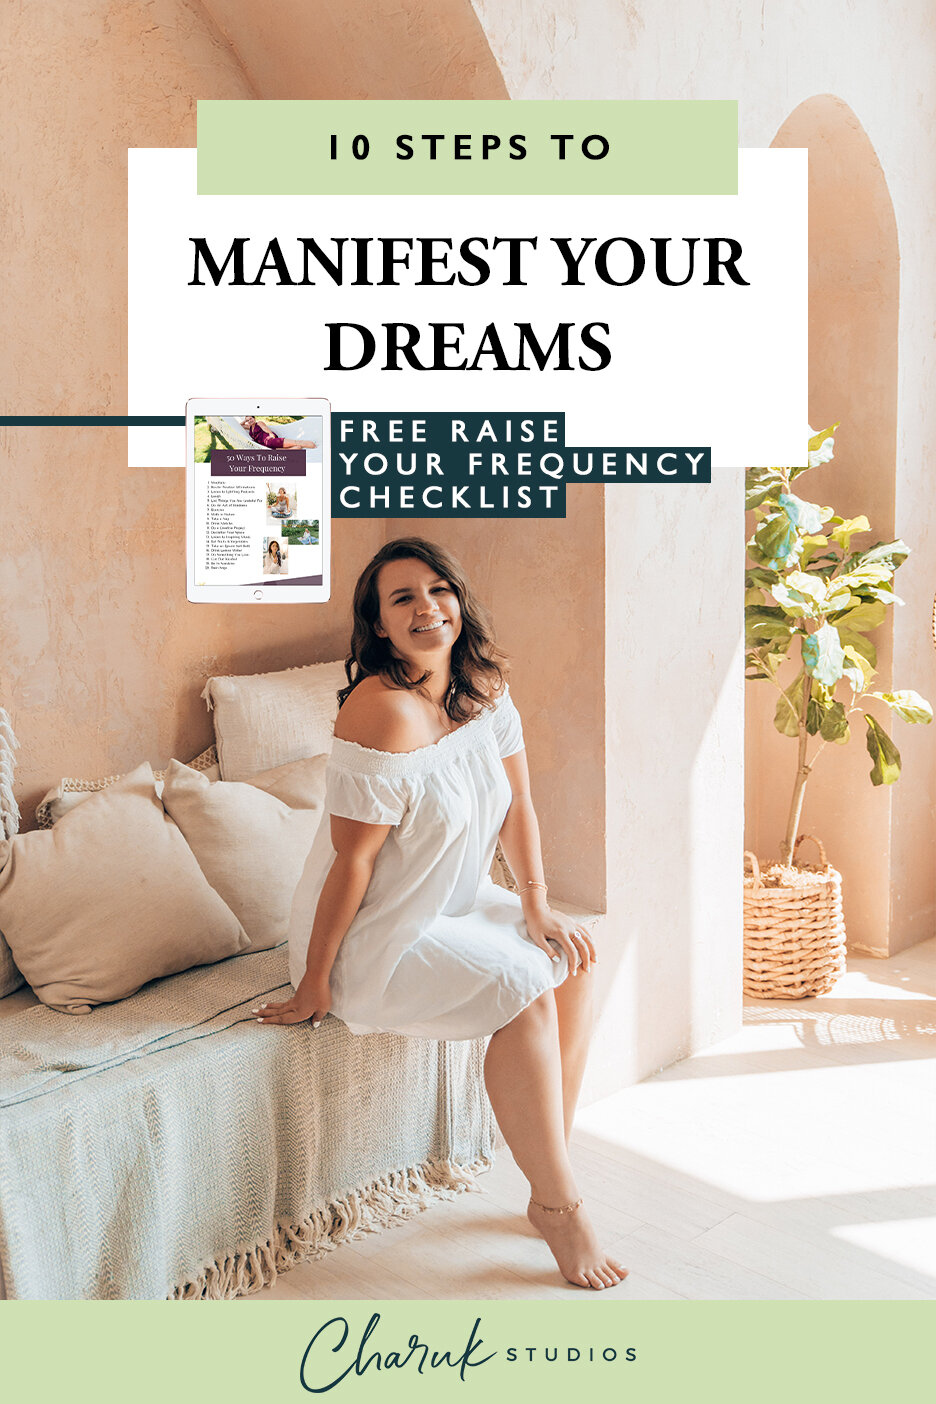 10 Steps to Manifest Your Dreams - Charuk Studios